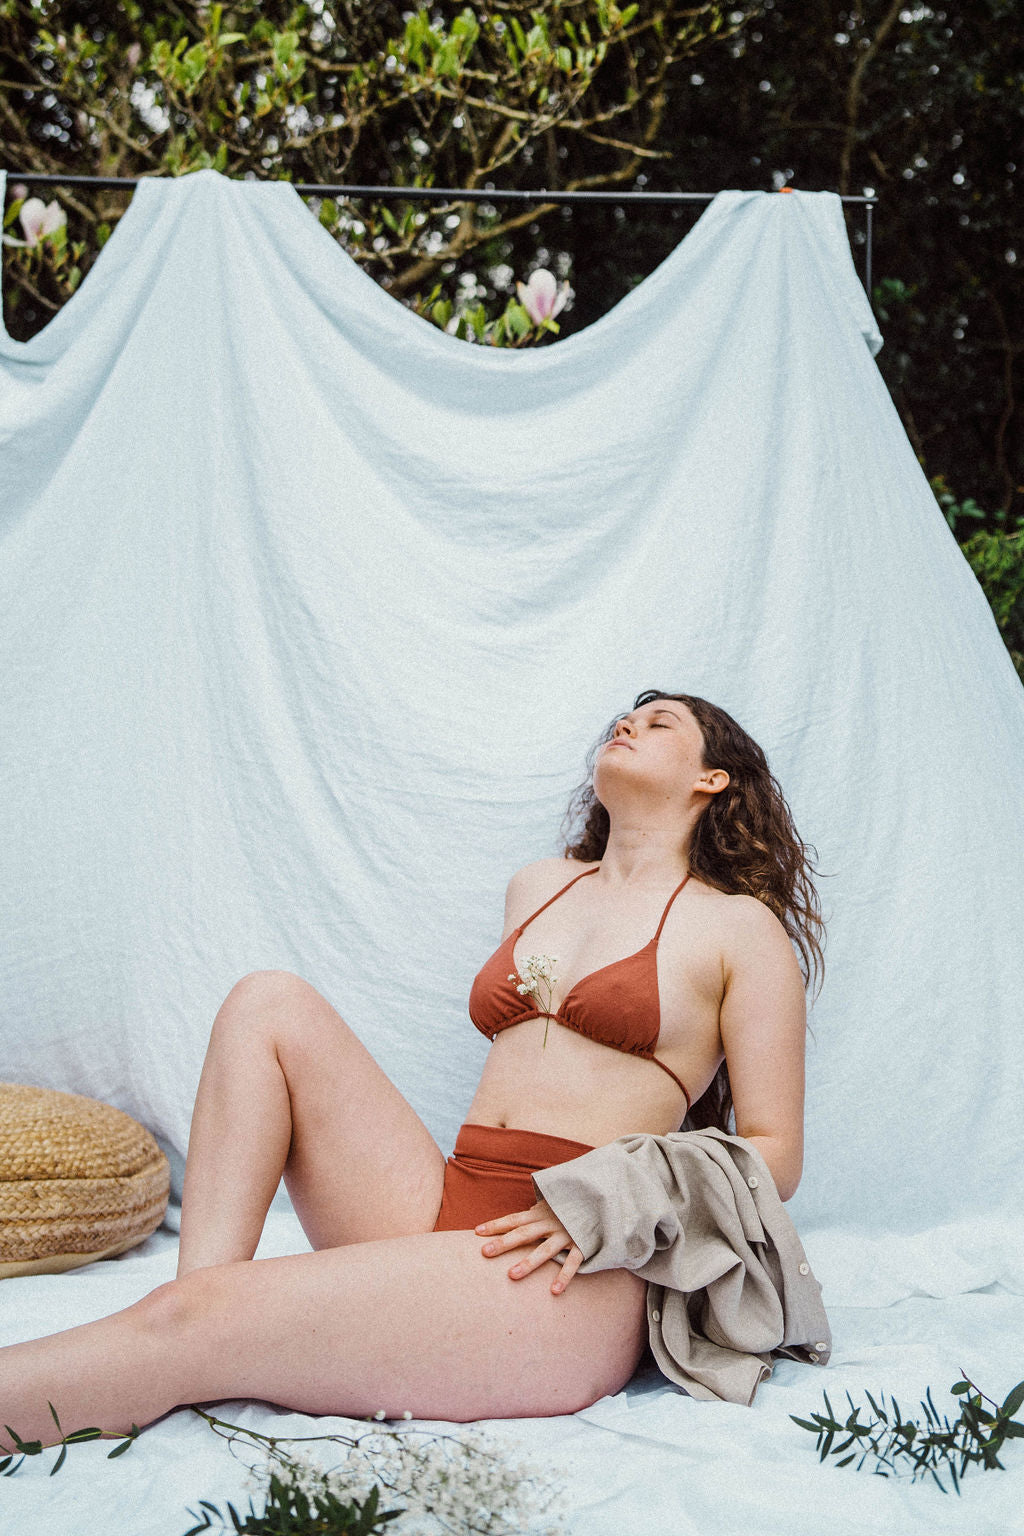 Solpardus Thea bamboo bikini. Super soft skin loving nature. All natural ethical sustainable sunwear swimwear linen clothing perfect for sensitive skin psoriasis and eczema